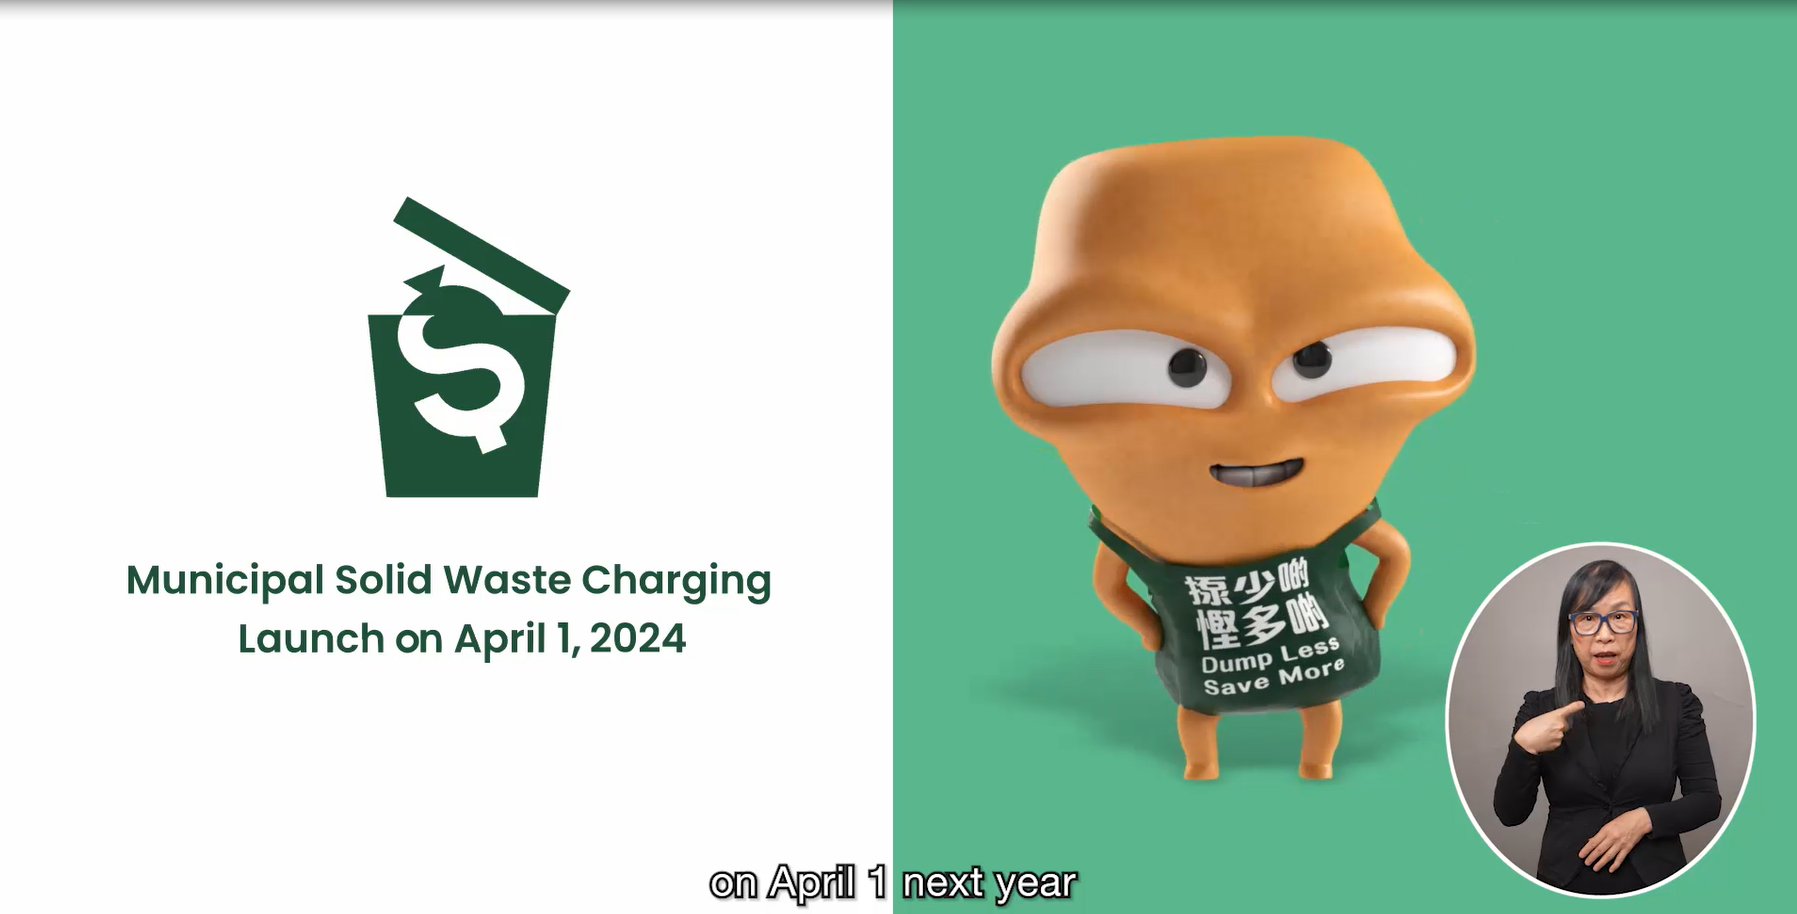 The Environmental Protection Department has been actively preparing for the Municipal Solid Waste (MSW) charging to be implemented on April 1, 2024. A series of publicity and education campaigns has been rolled out through various channels, including broadcasting Announcements in the Public Interest on television and radio; displaying advertisement on public transportation, stations and stops; producing television and radio programmes and social media videos; and displaying different kinds of banners, posters and leaflets, with a view to deepening the general public's knowledge of MSW charging. Photo shows a TV Announcement in the Public Interest for MSW charging.